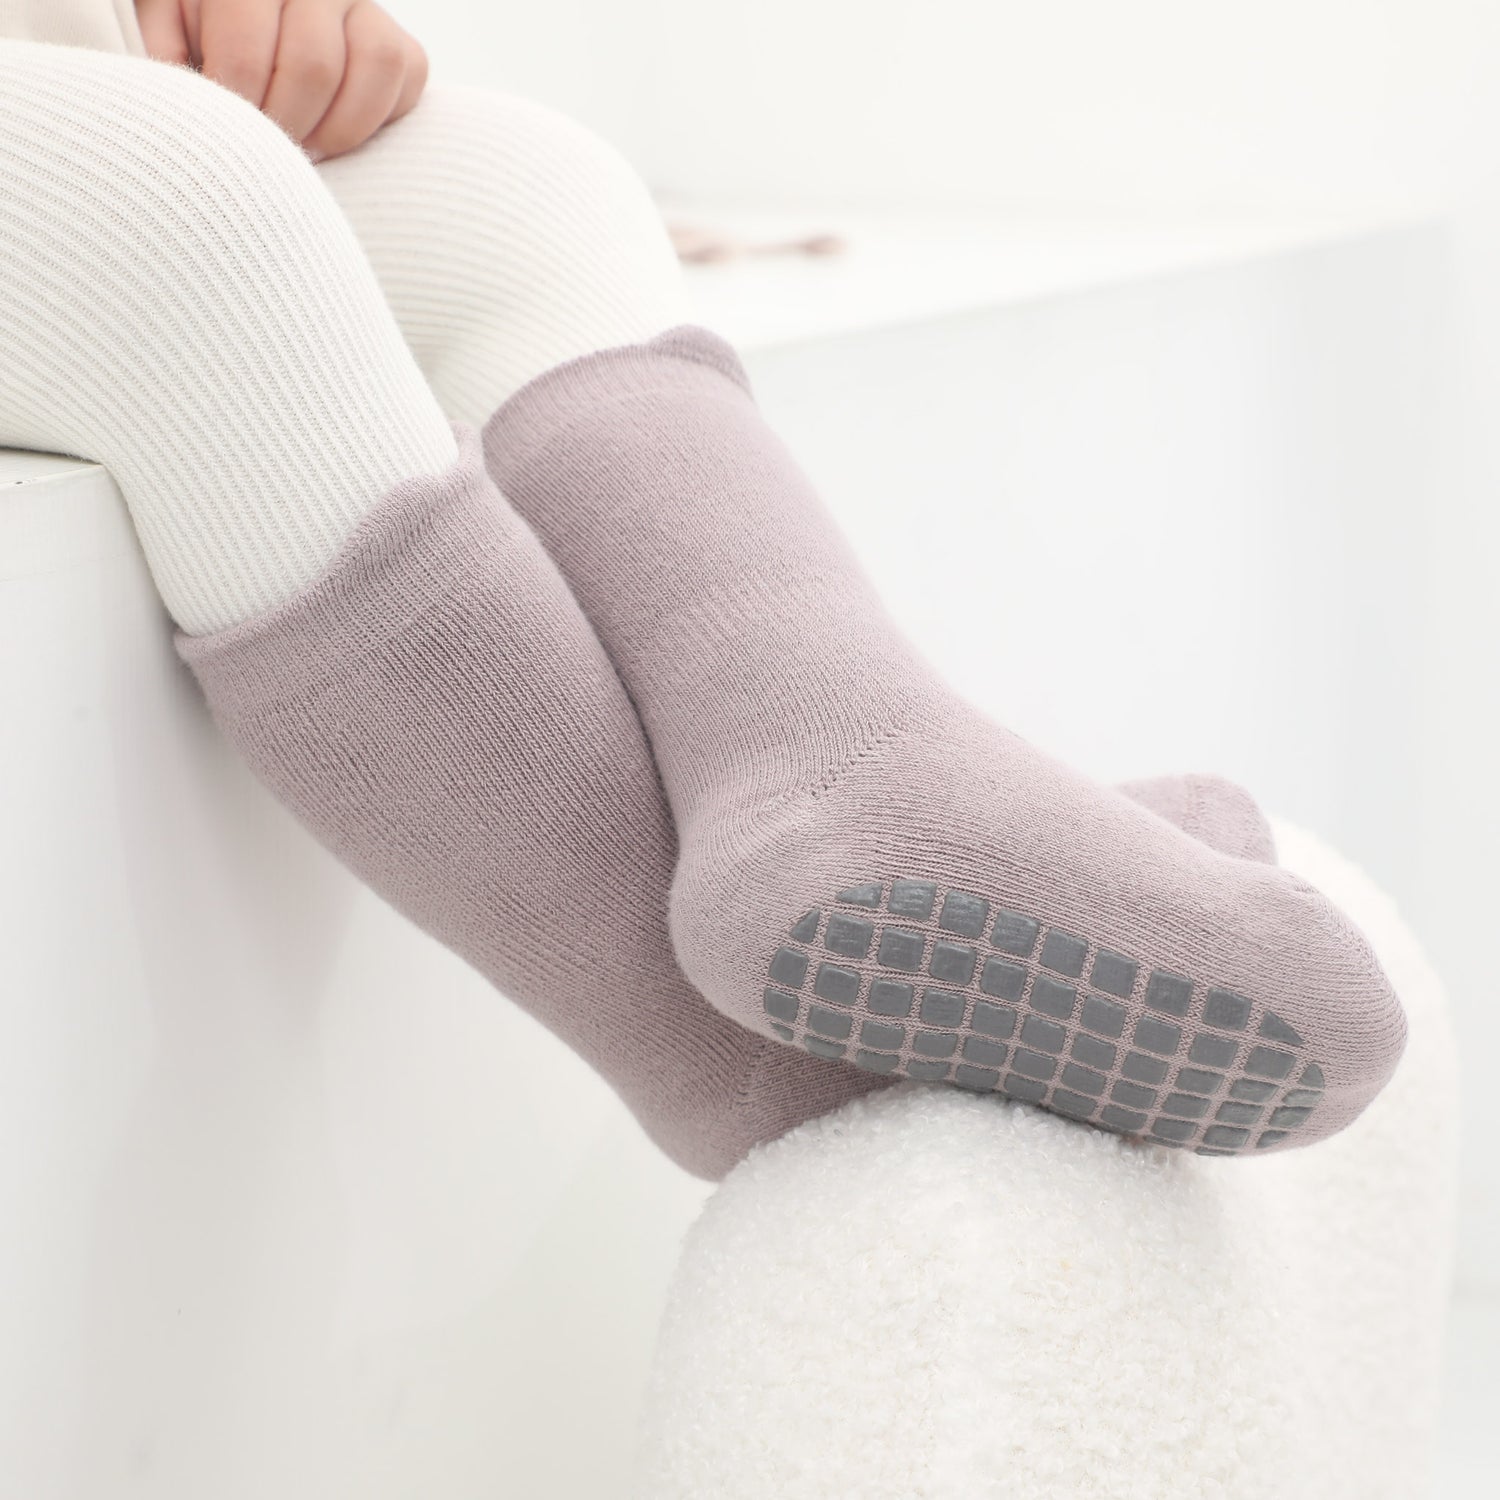 Eco-friendly toddler grip socks made from organic materials